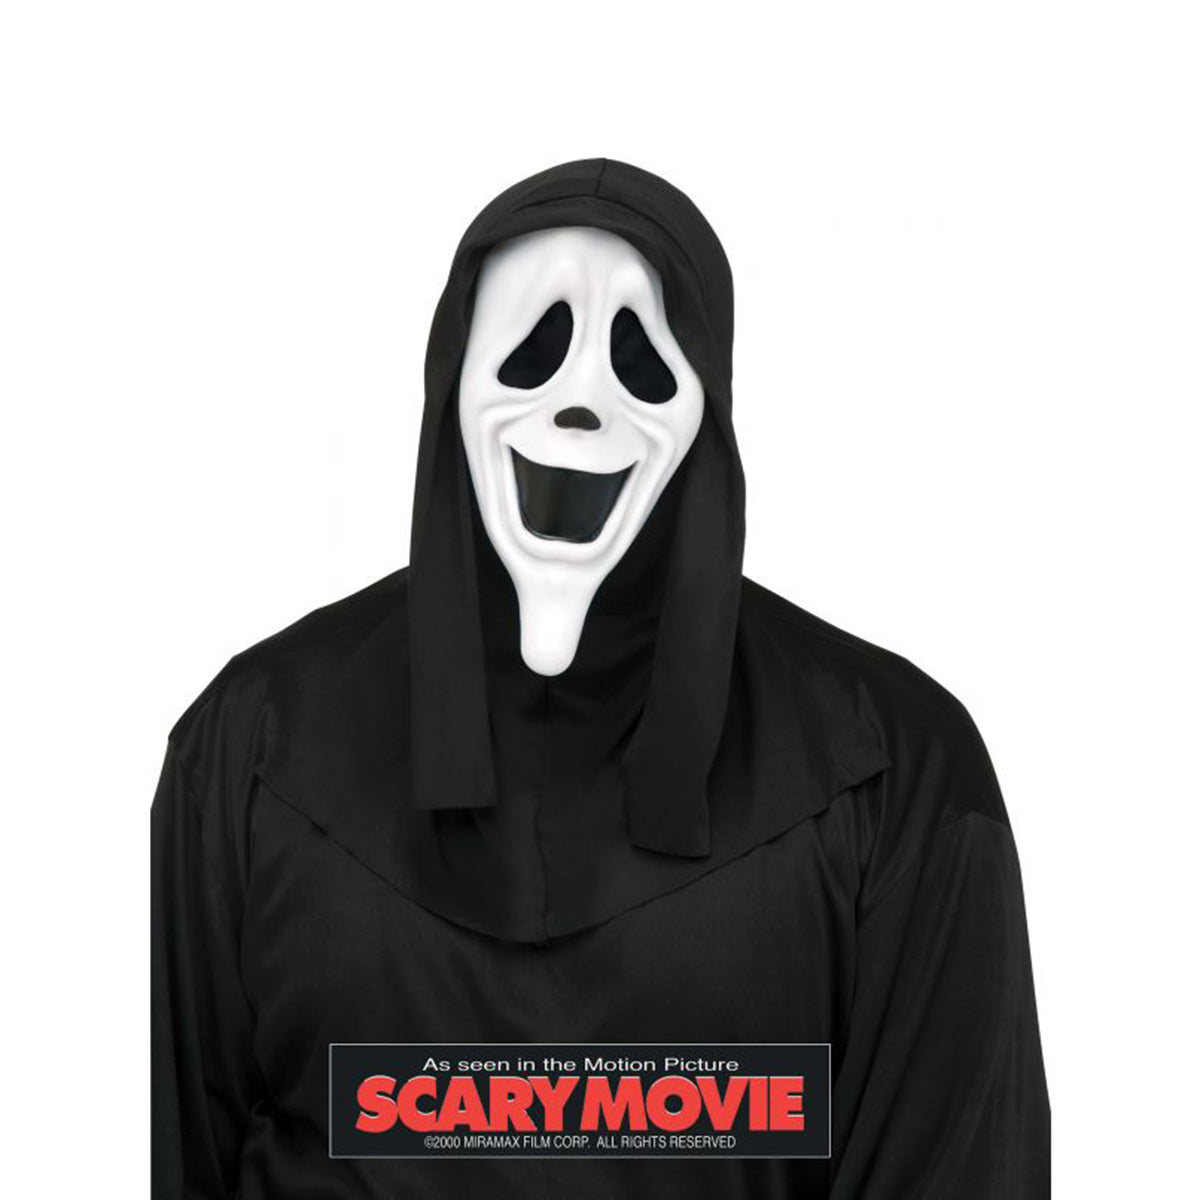 FUN WORLD Costume Accessories Scary Movie Smiley Mask with Shroud 023168285119